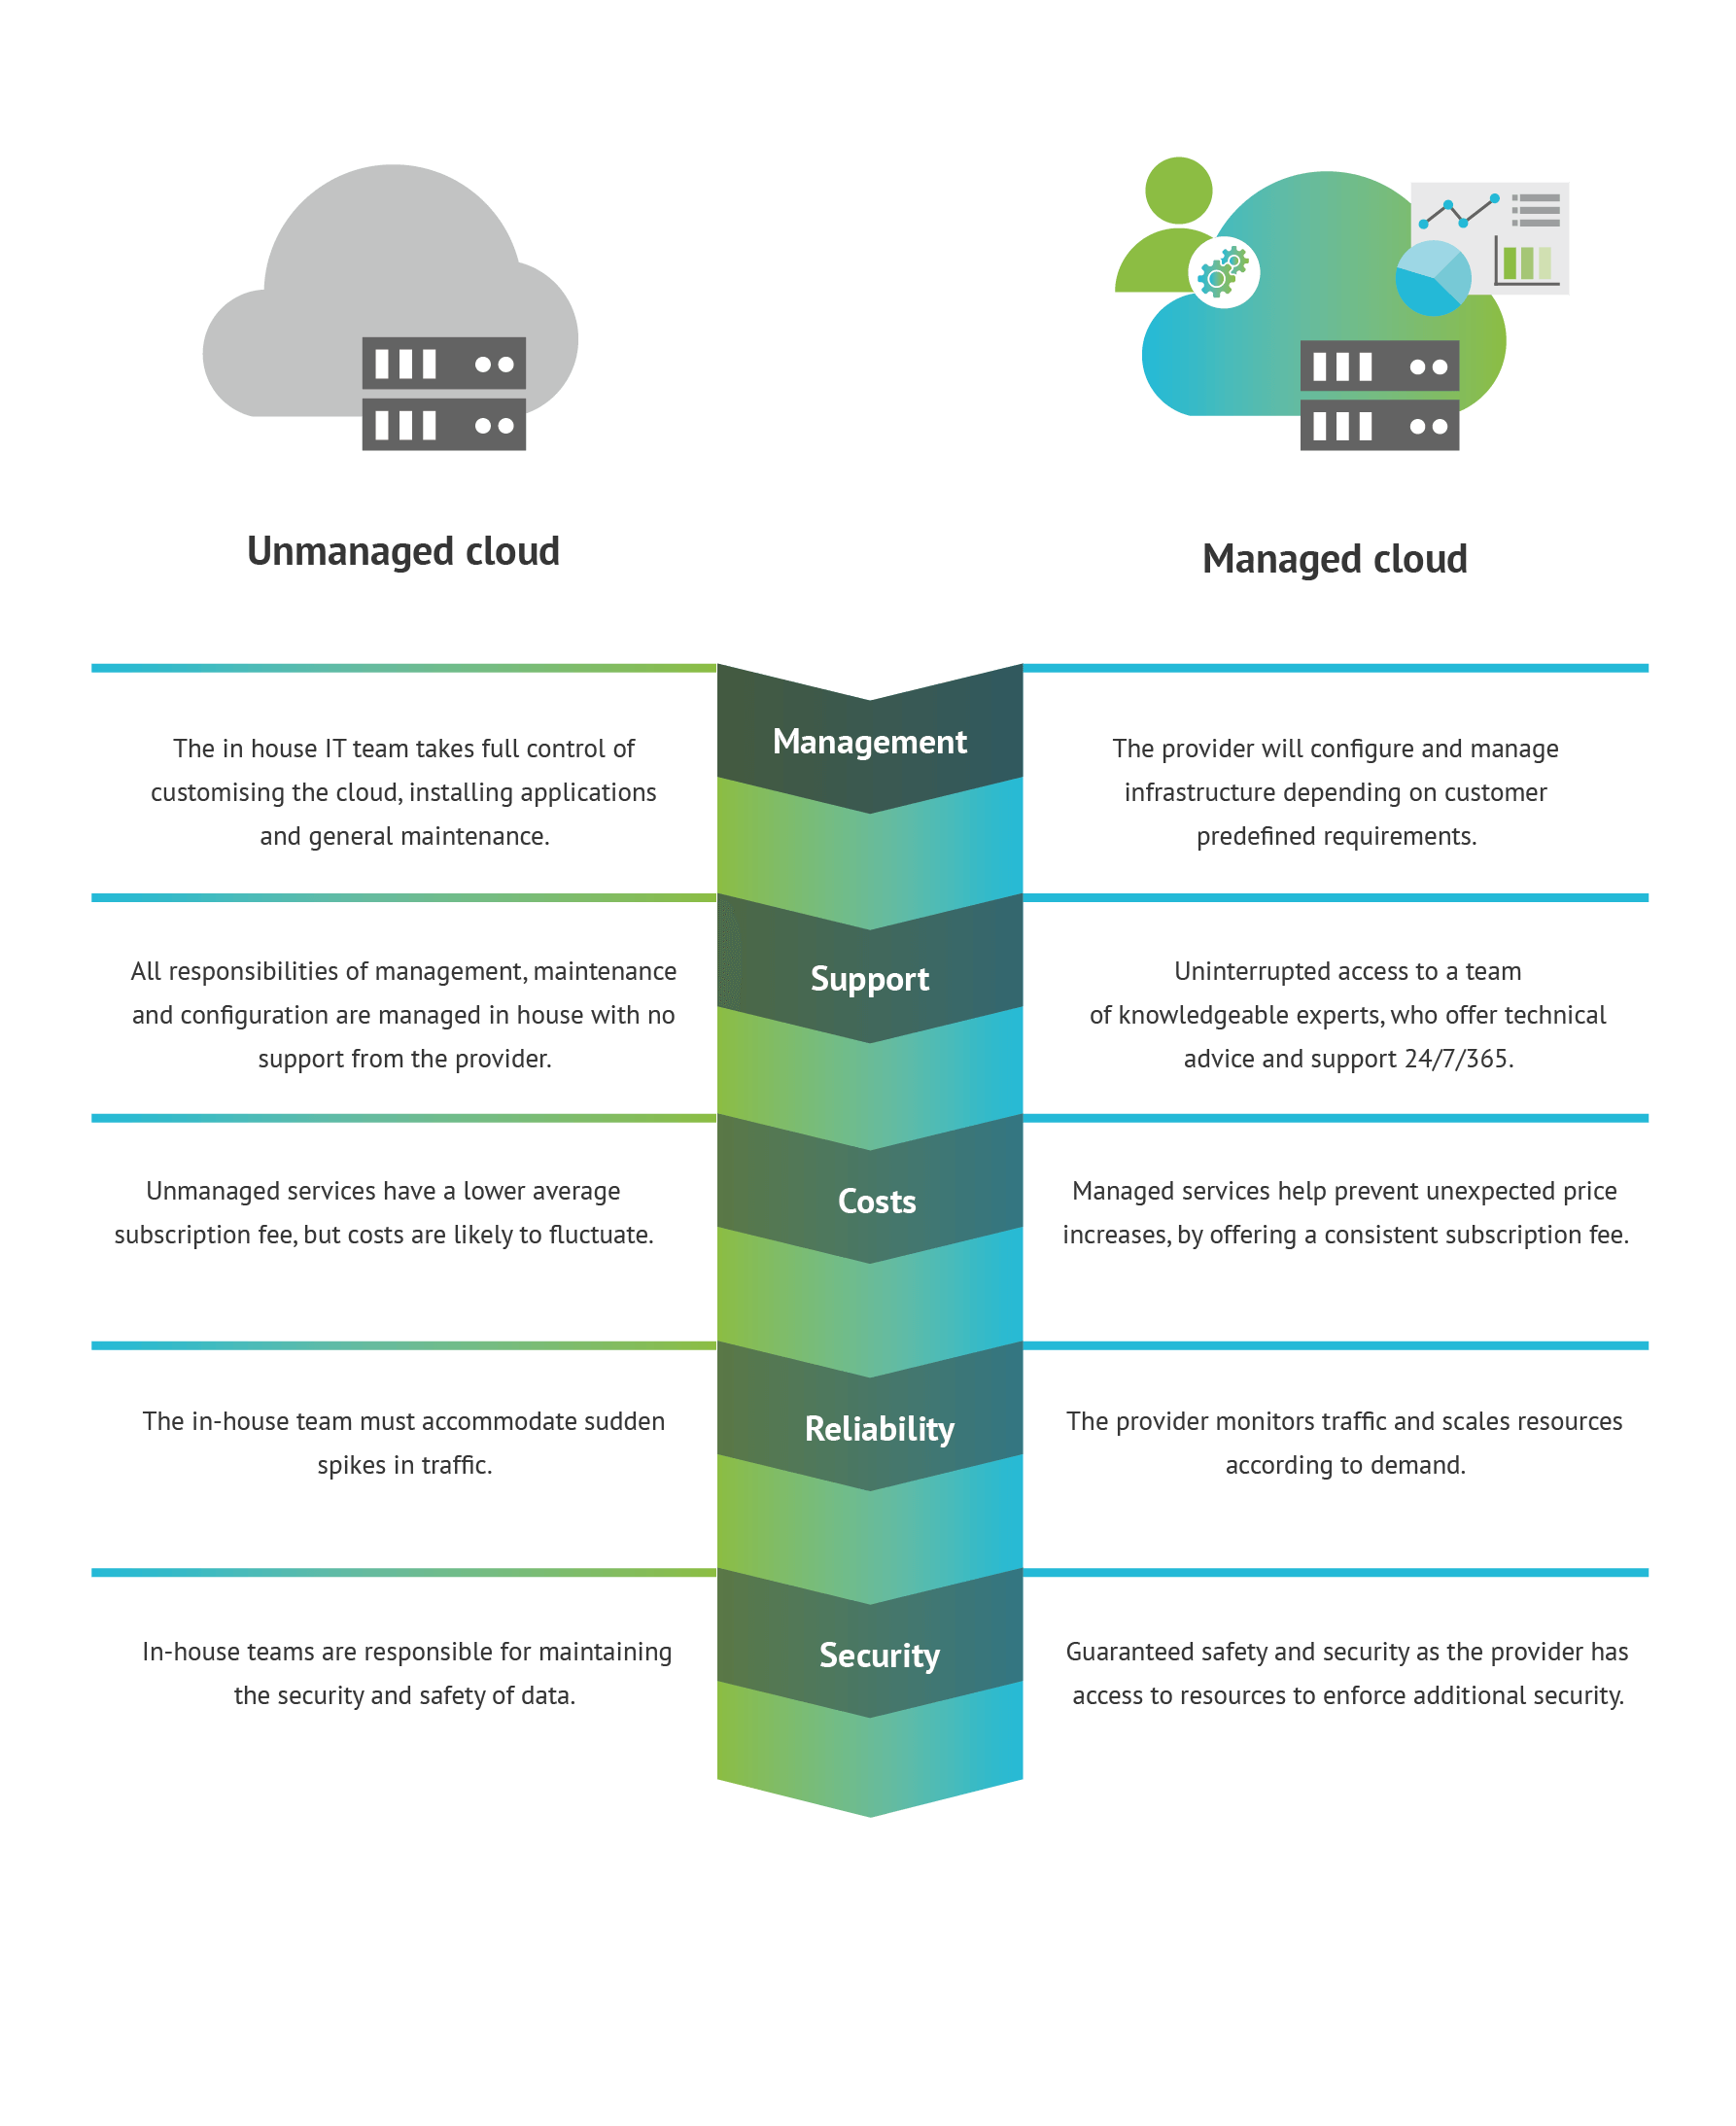 Infographic explaining the difference between managed cloud and unmanaged cloud, with differences split into five sections: management, support, costs, reliability and security.